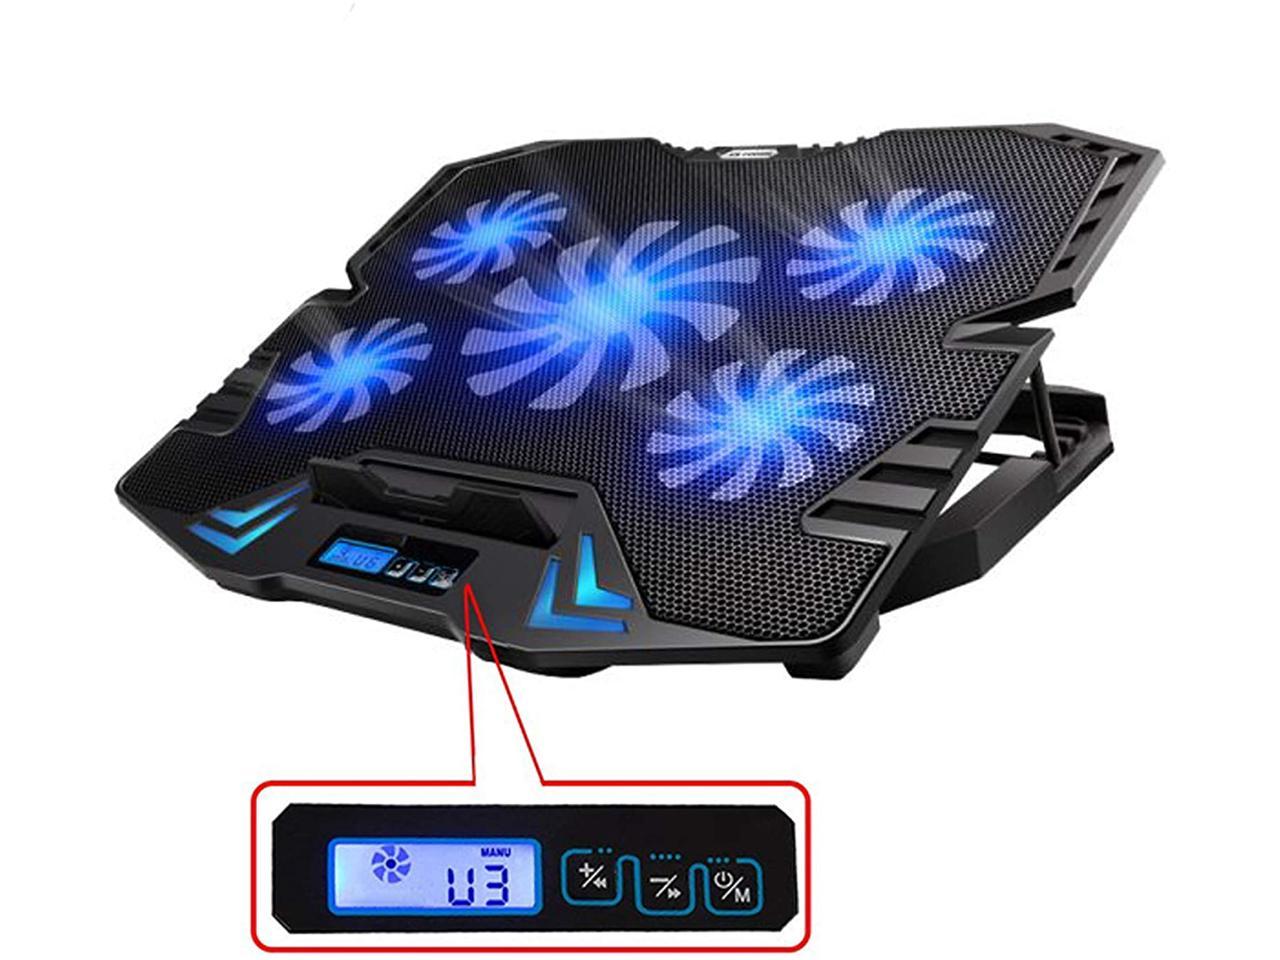 TopMate C5 1215.6 inch Gaming Laptop Cooler Cooling Pad 5 Quiet Fans